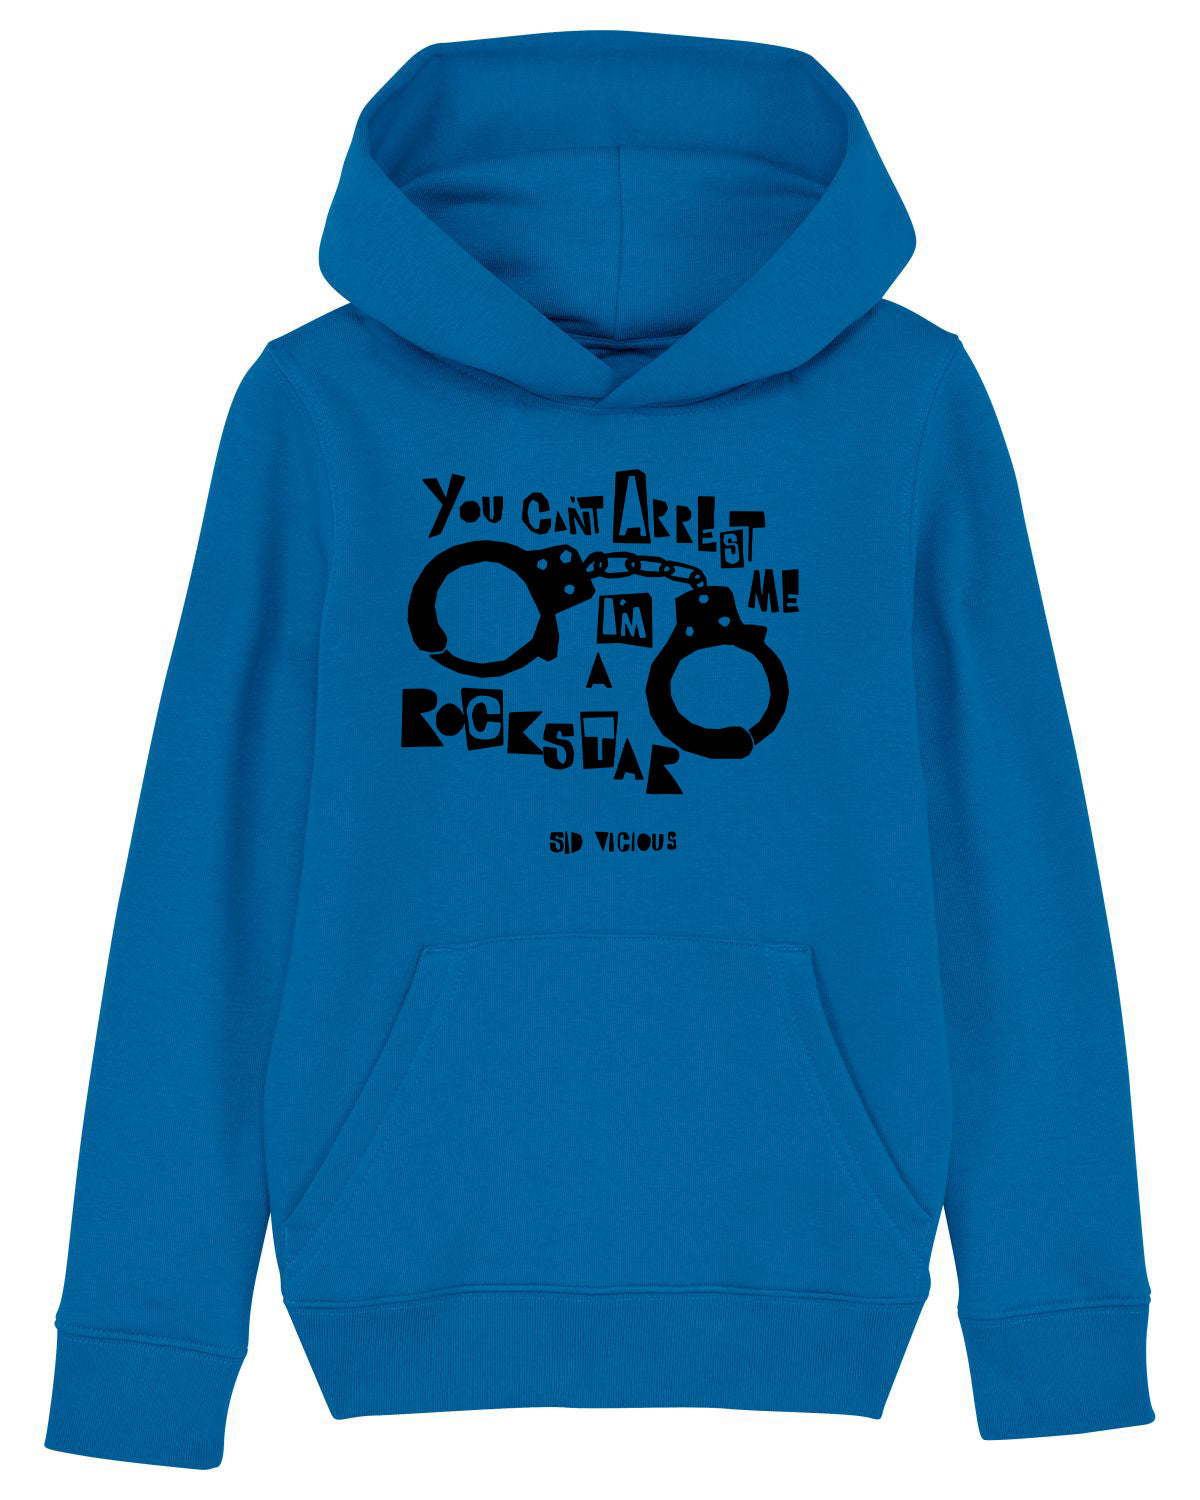 'You Can't Arrest Me I'm A Rock Star' Organic Adult Unisex Hoodie